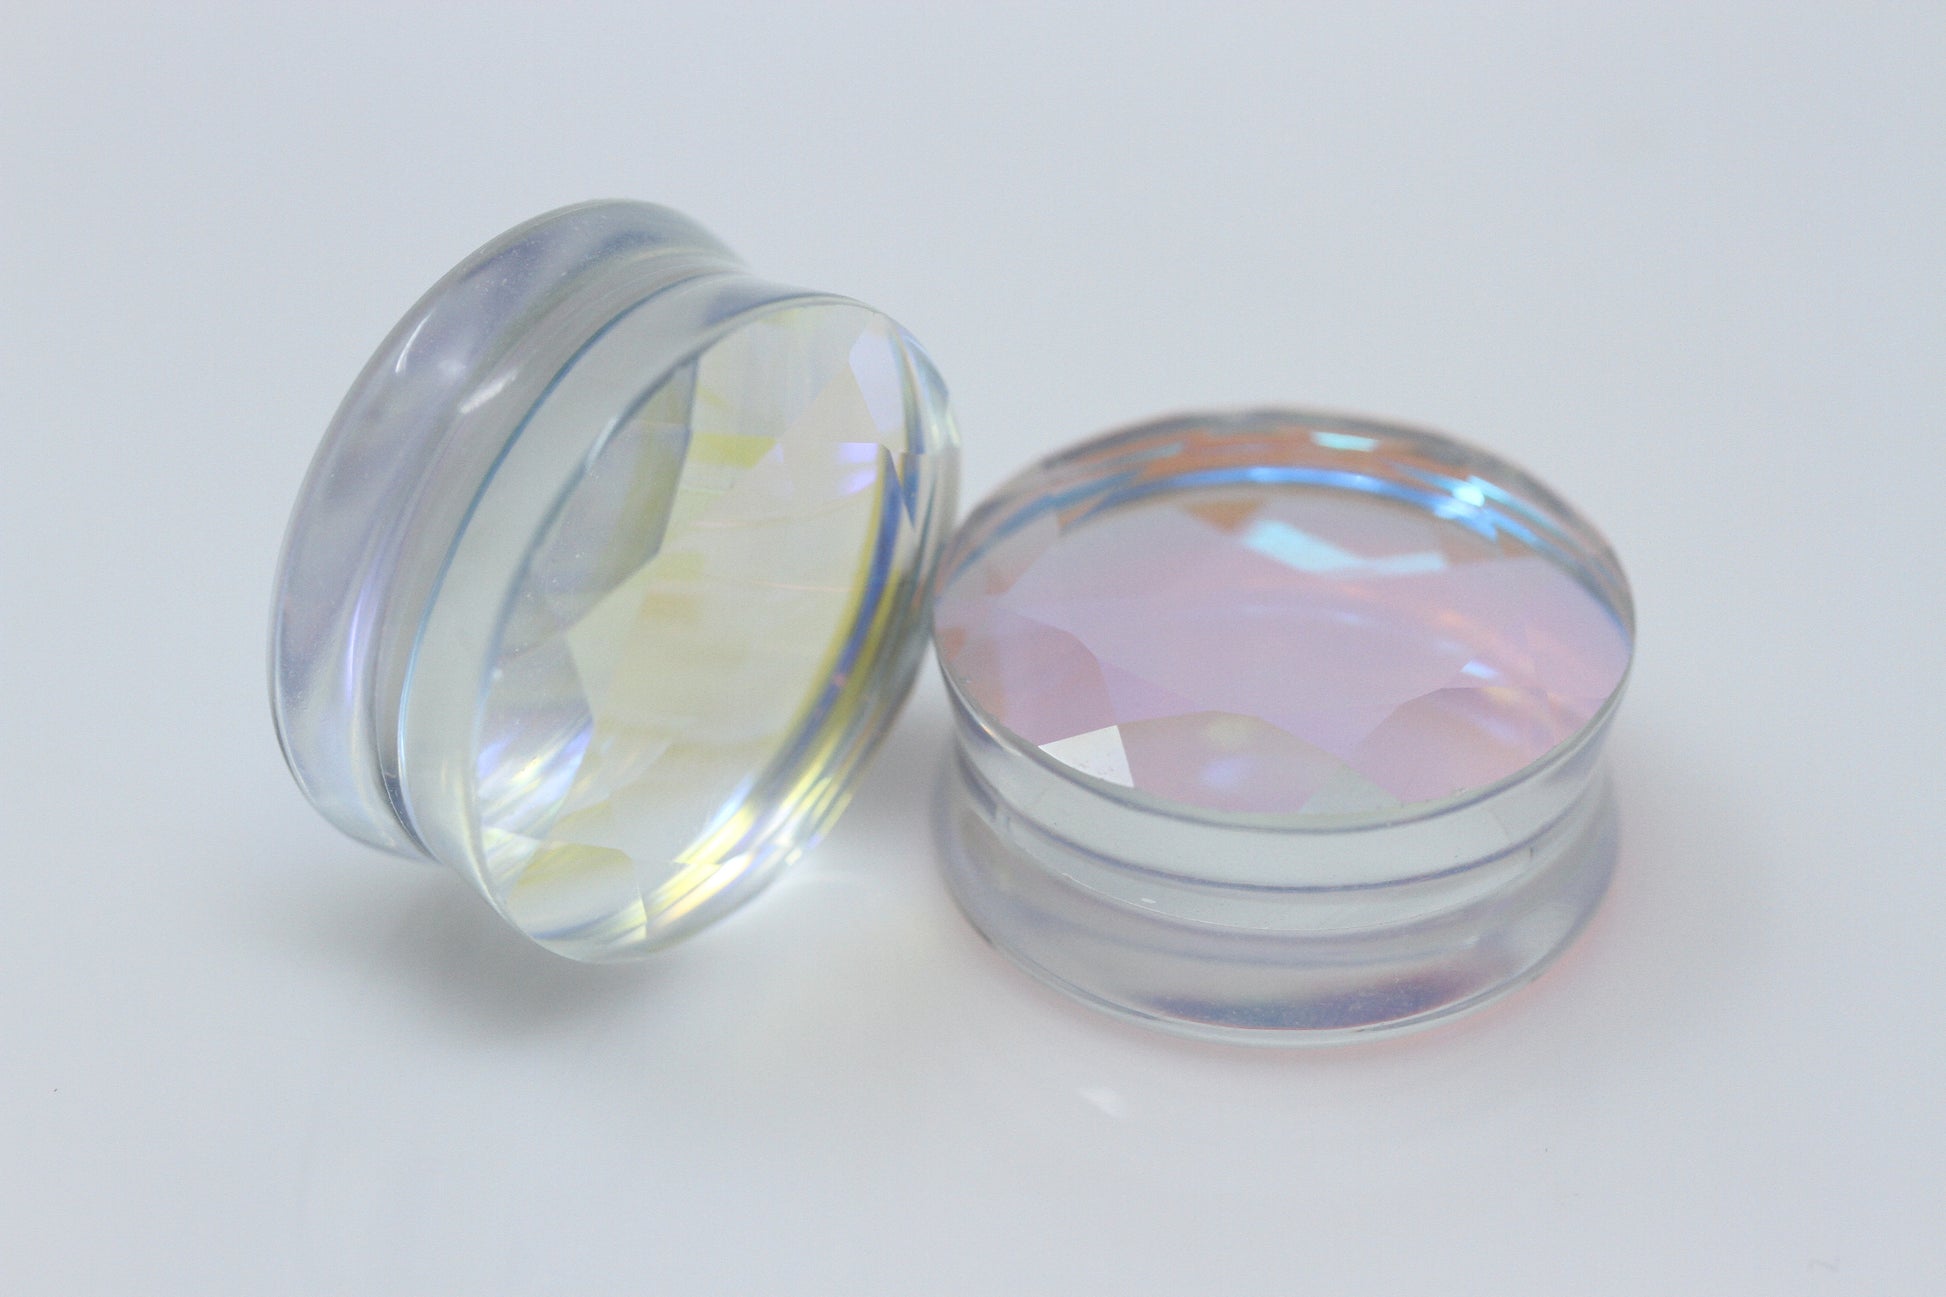 Holographic Faceted Plugs - Pair 2